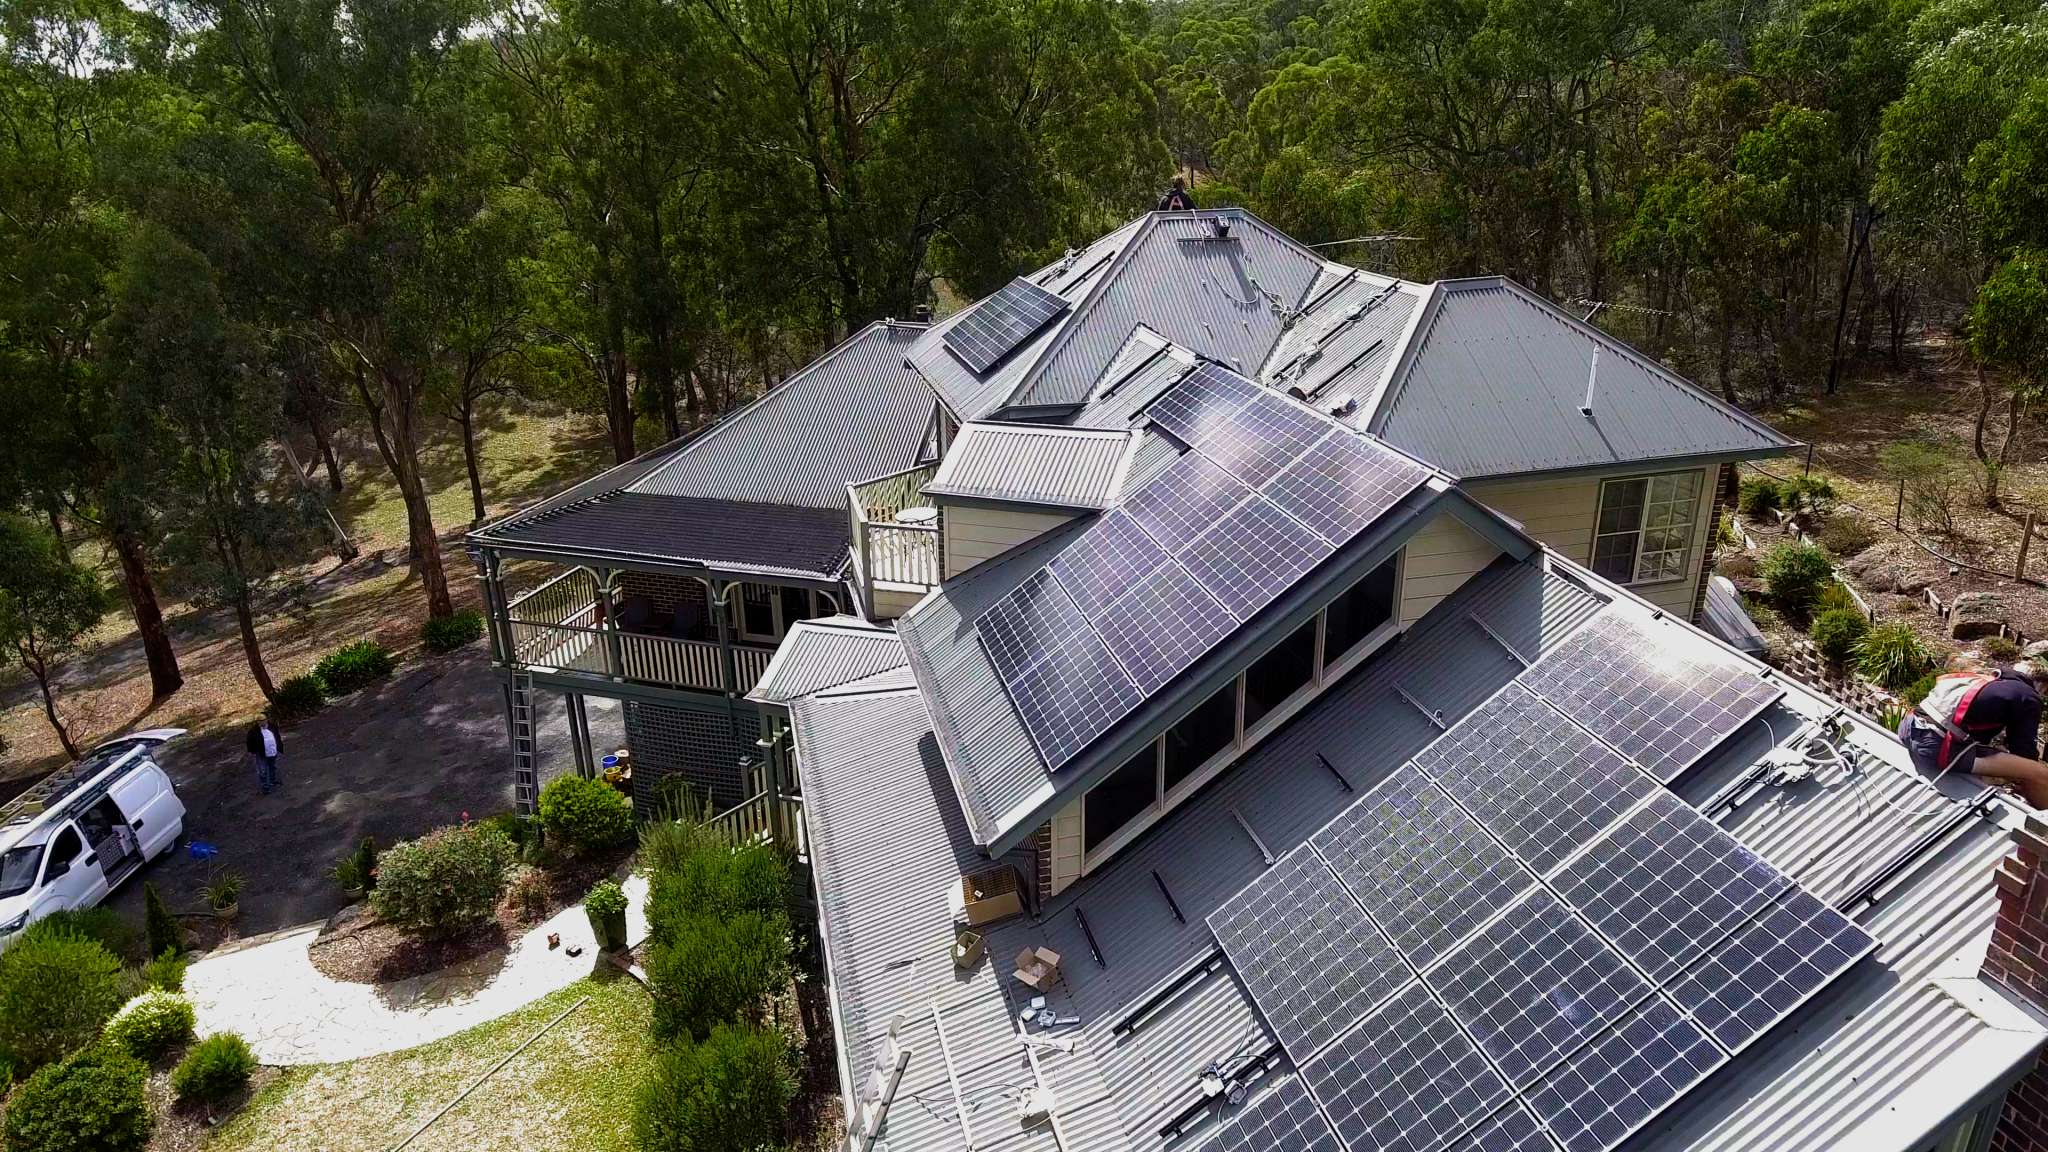 Image of off-grid solar panel installation maximizing roof space and orientation